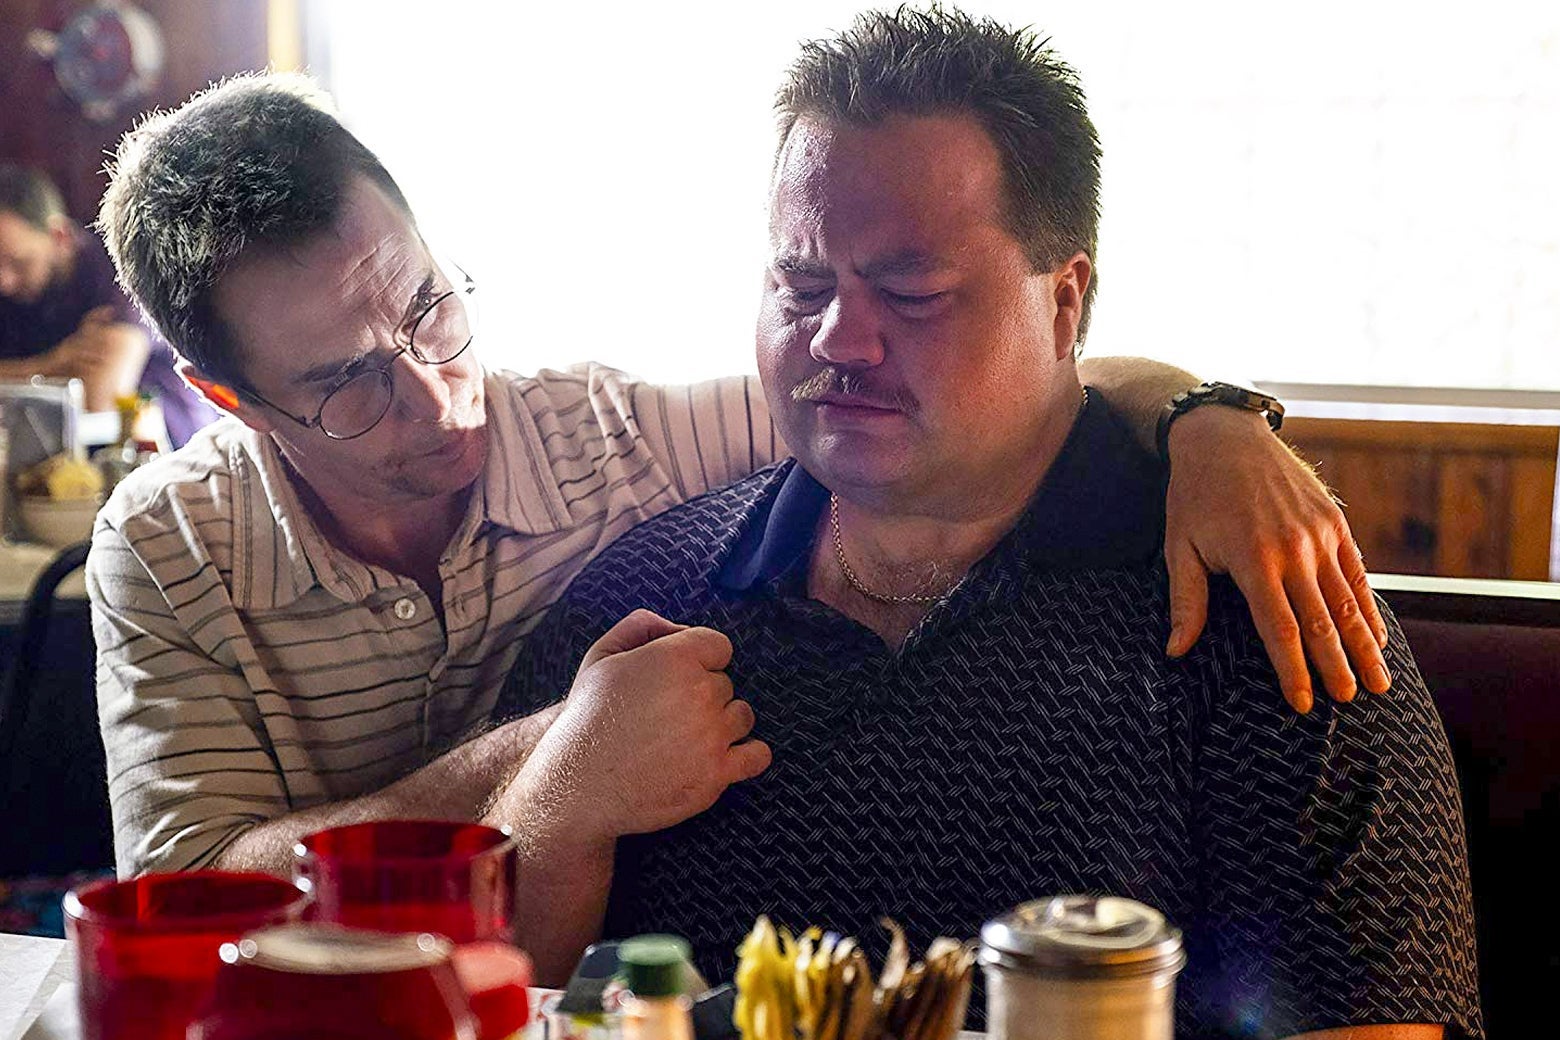 Sam Rockwell puts an arm around a visibly anguished Paul Walter Hauser while they sit in a booth in this still from Richard Jewell.